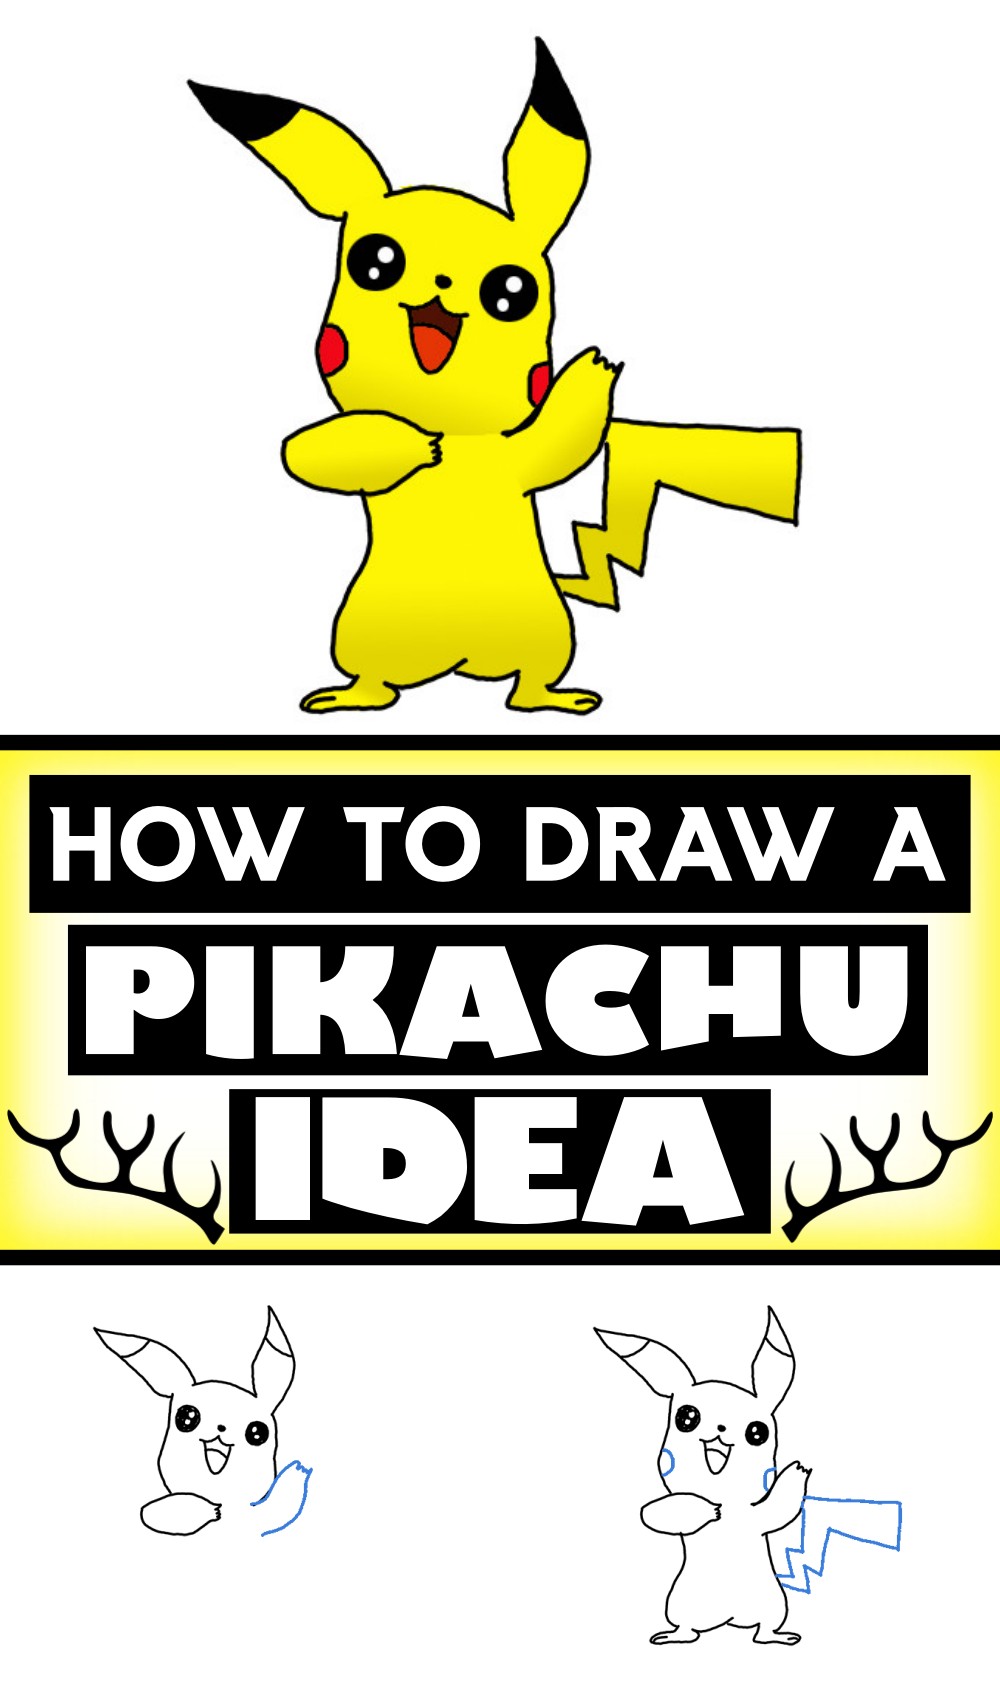 How To Draw A Pikachu